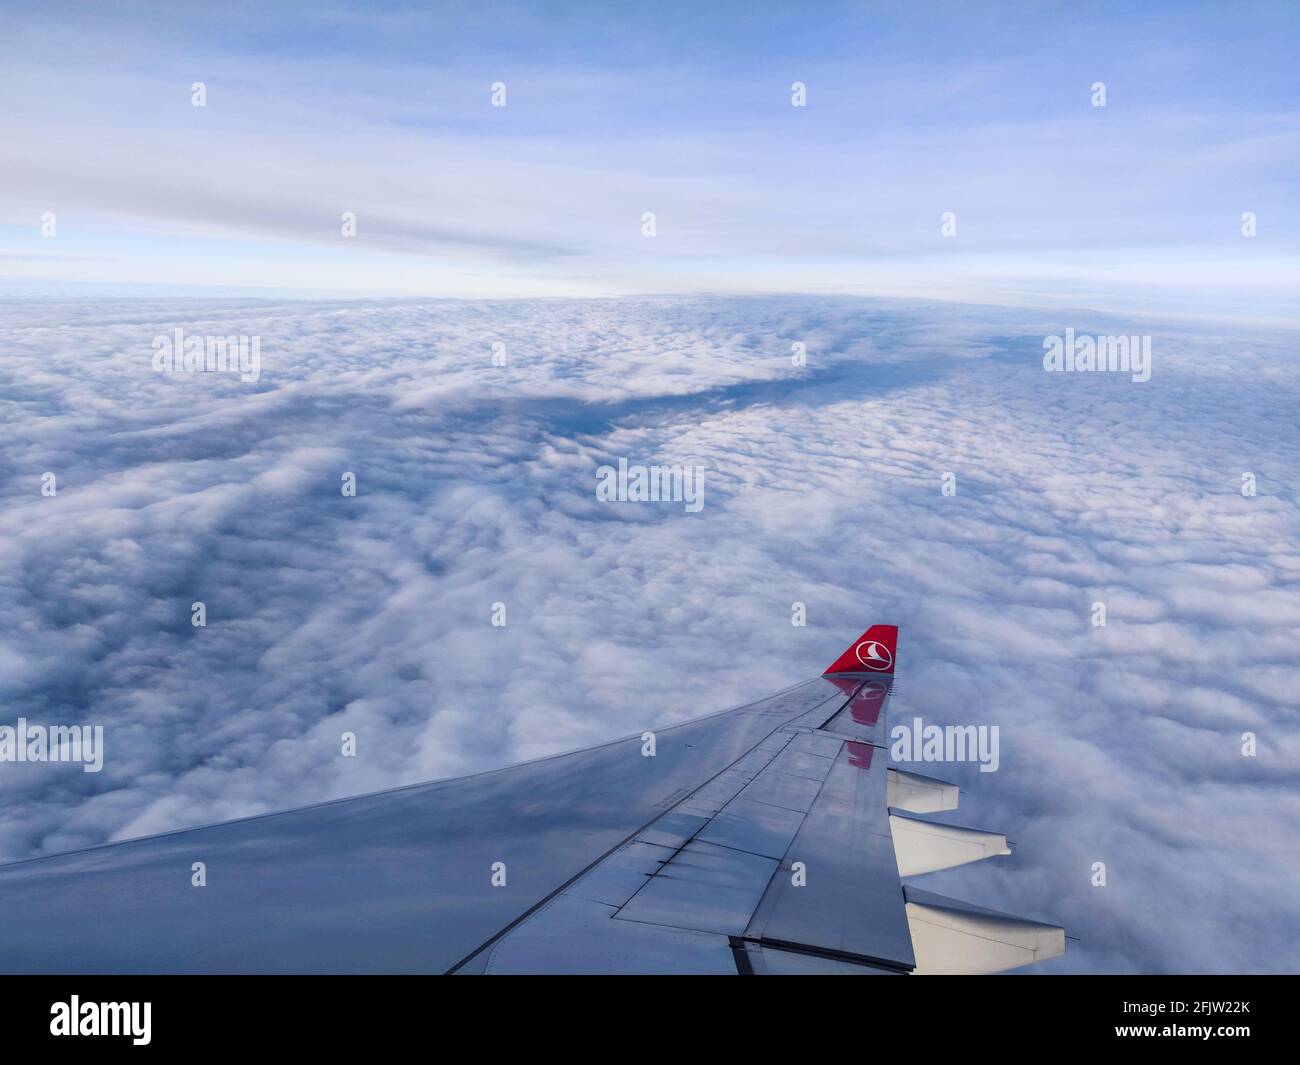 ISTANBUL, TURKEY - Mar 02, 2021: Flying above the clouds on Turkish Airlines Stock Photo